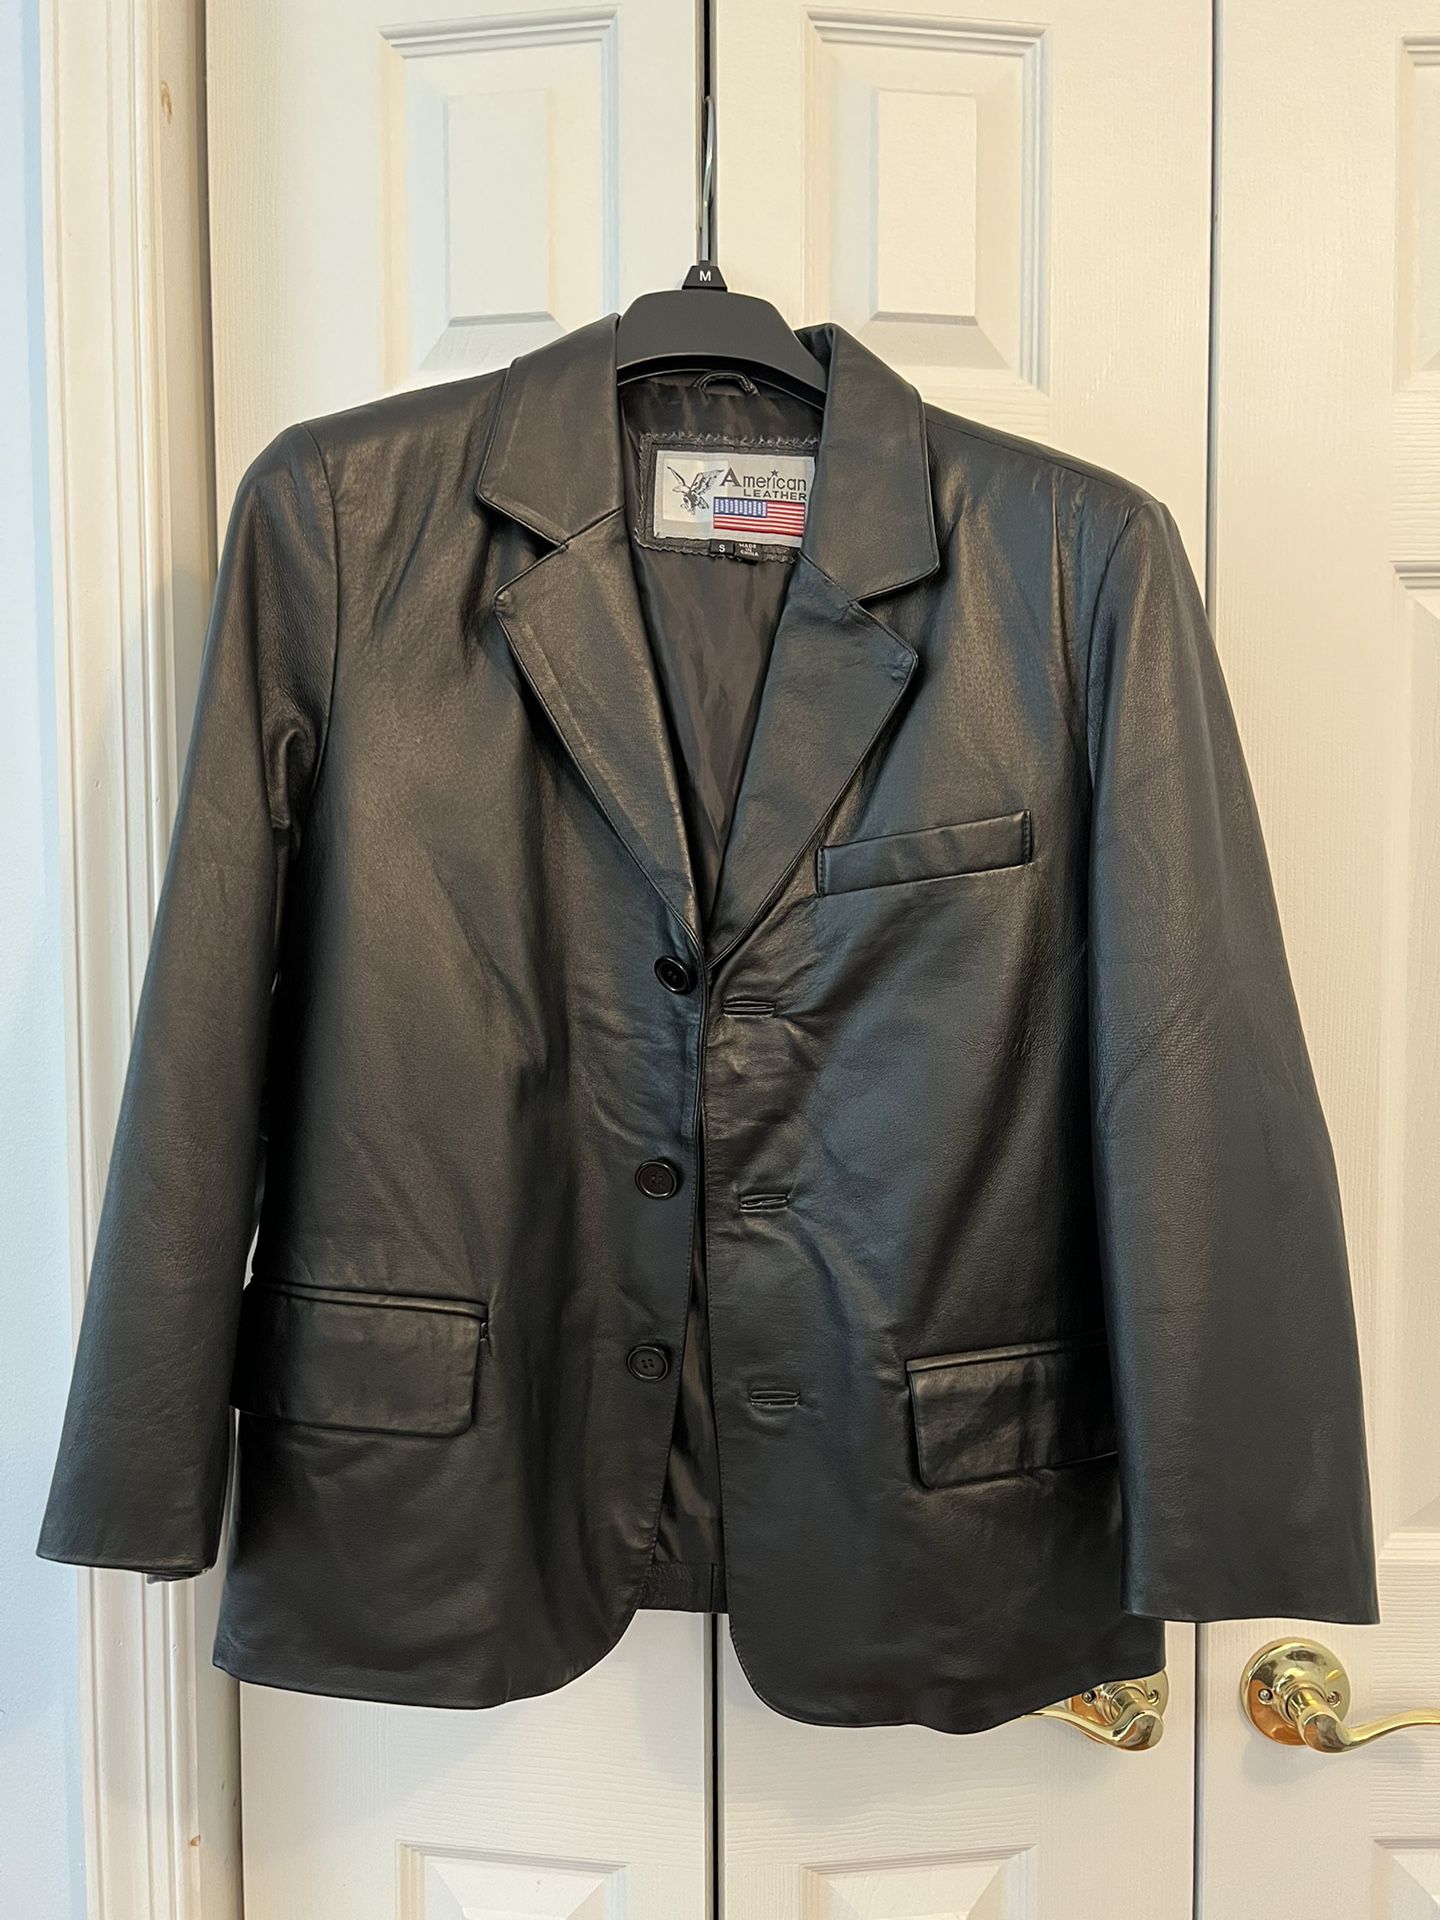 American Leather Jacket Size Small ( 100% American Genuine Leather And Brand New ) Retail $575 Local Pick Up Only  .Thanks .